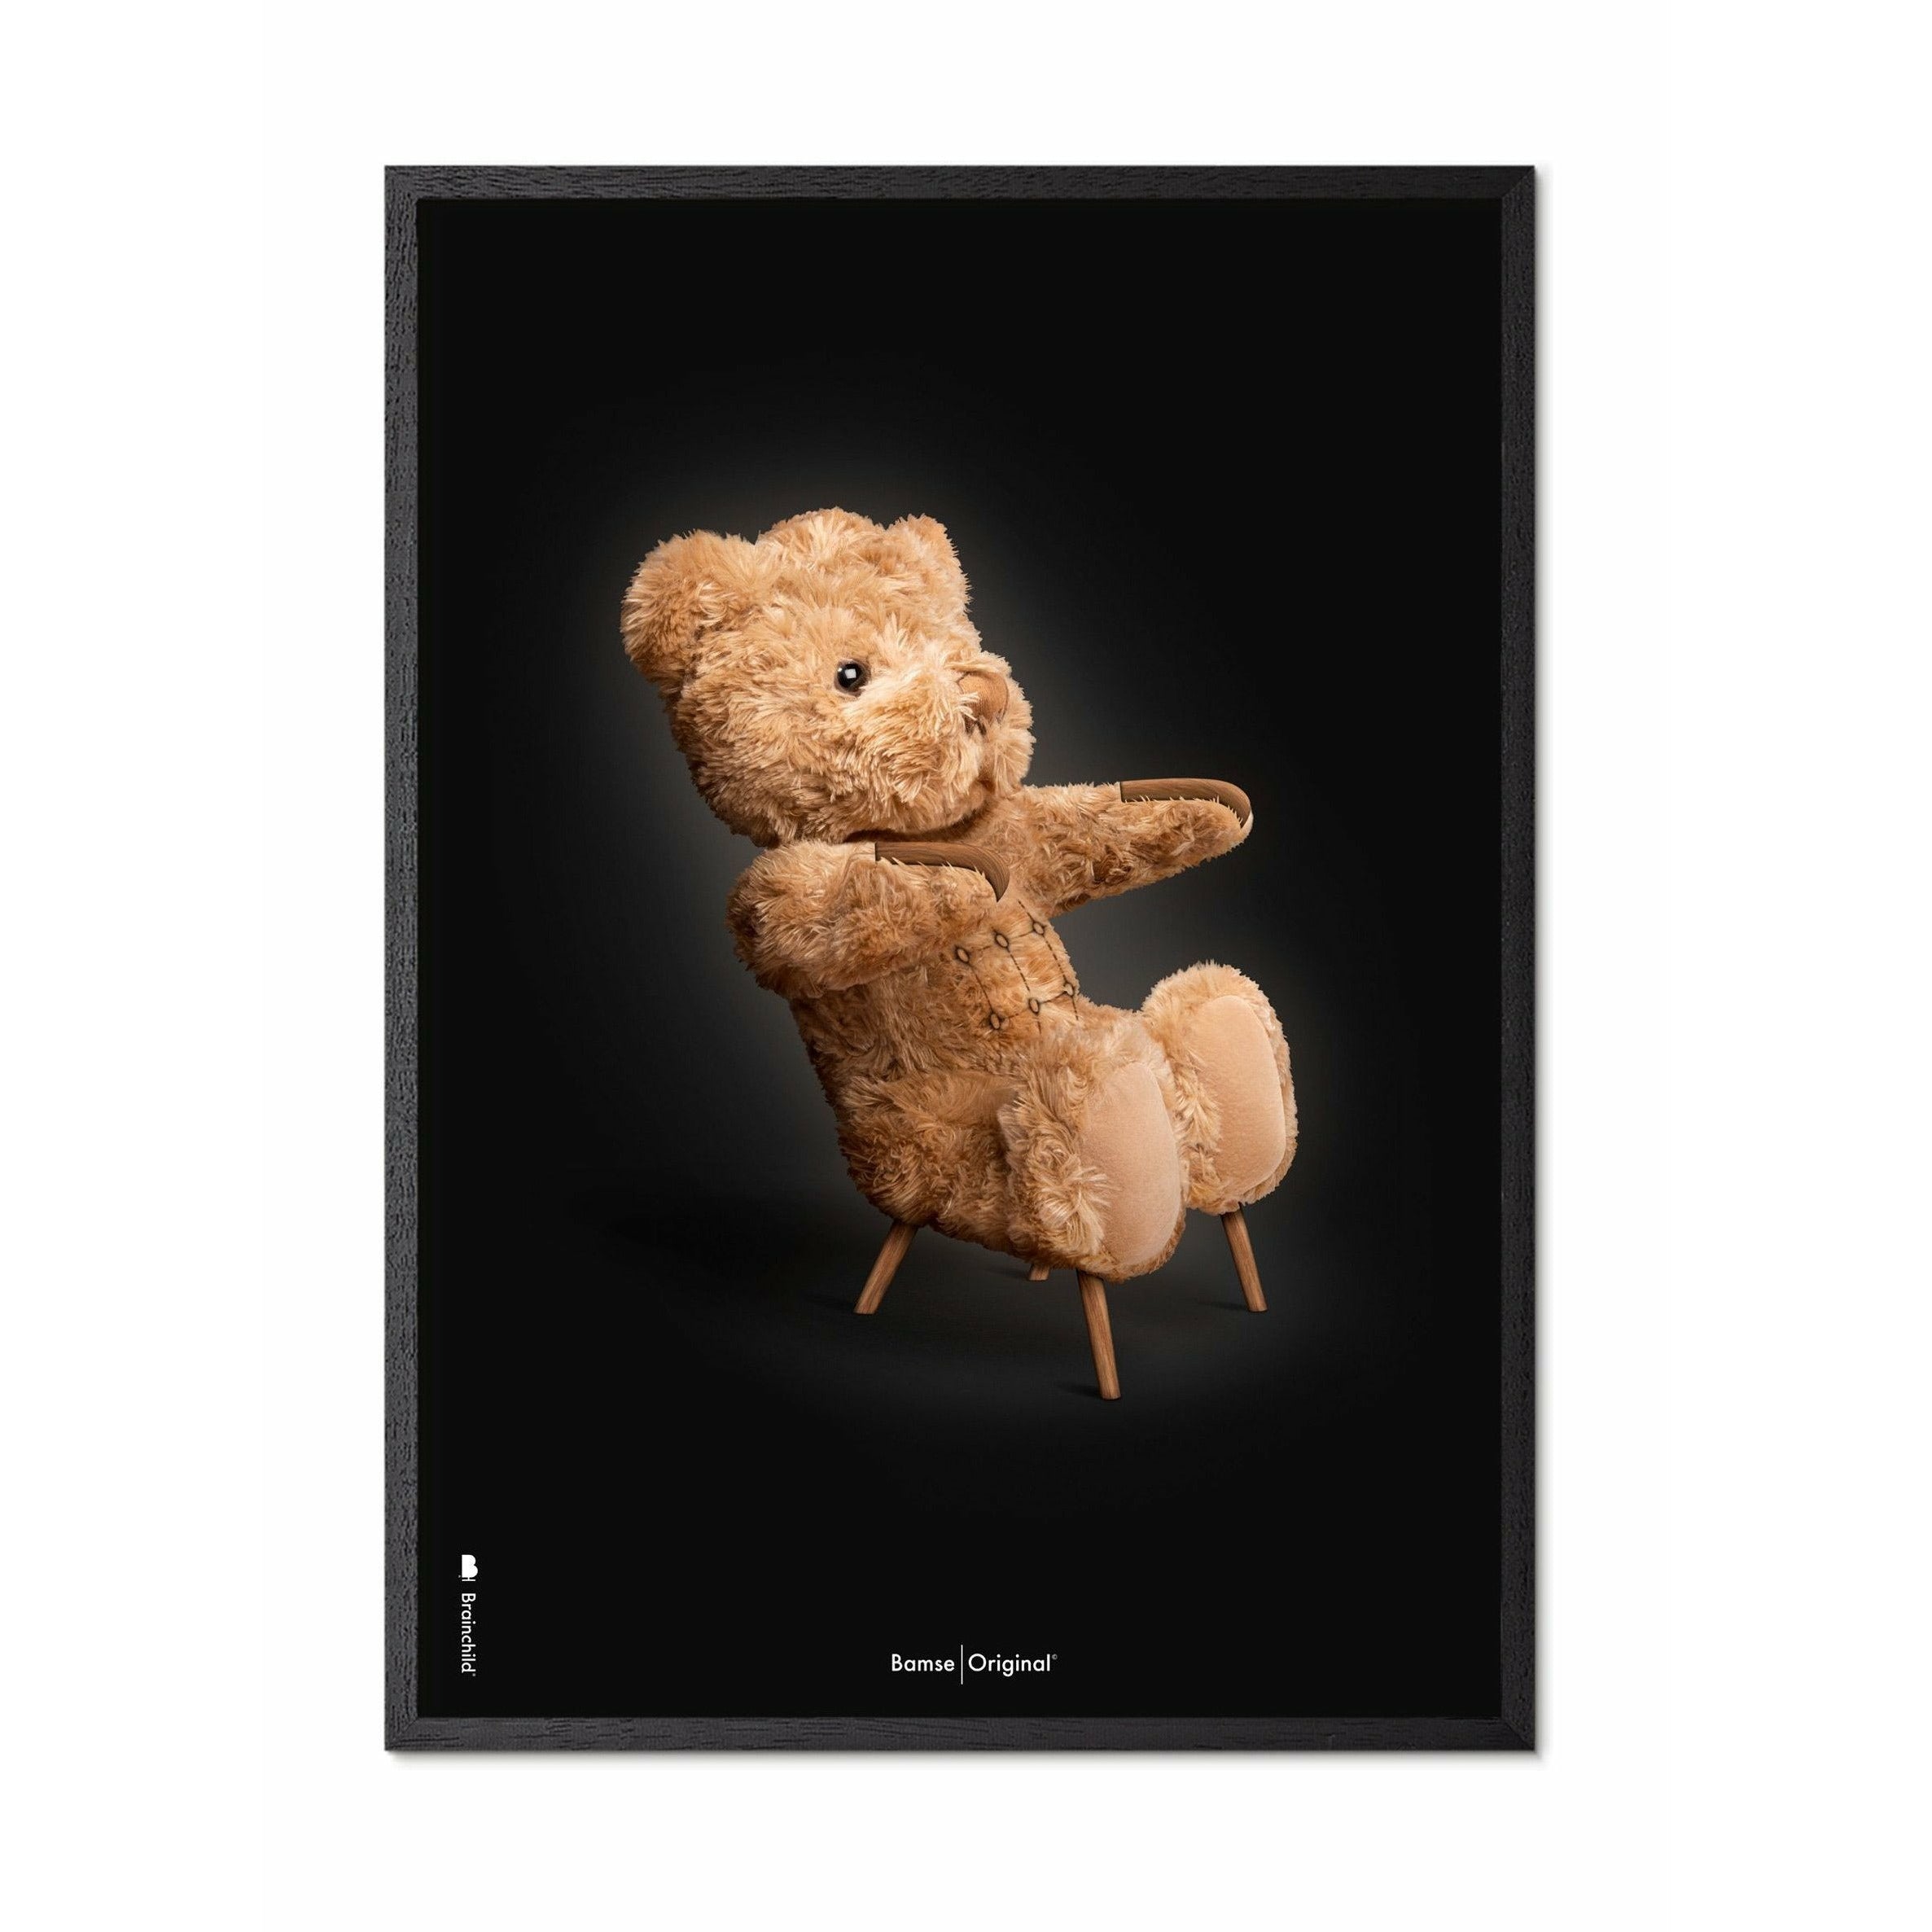 Brainchild Teddy Bear Classic Poster, Frame Made Of Black Lacquered Wood 70x100 Cm, Black Background